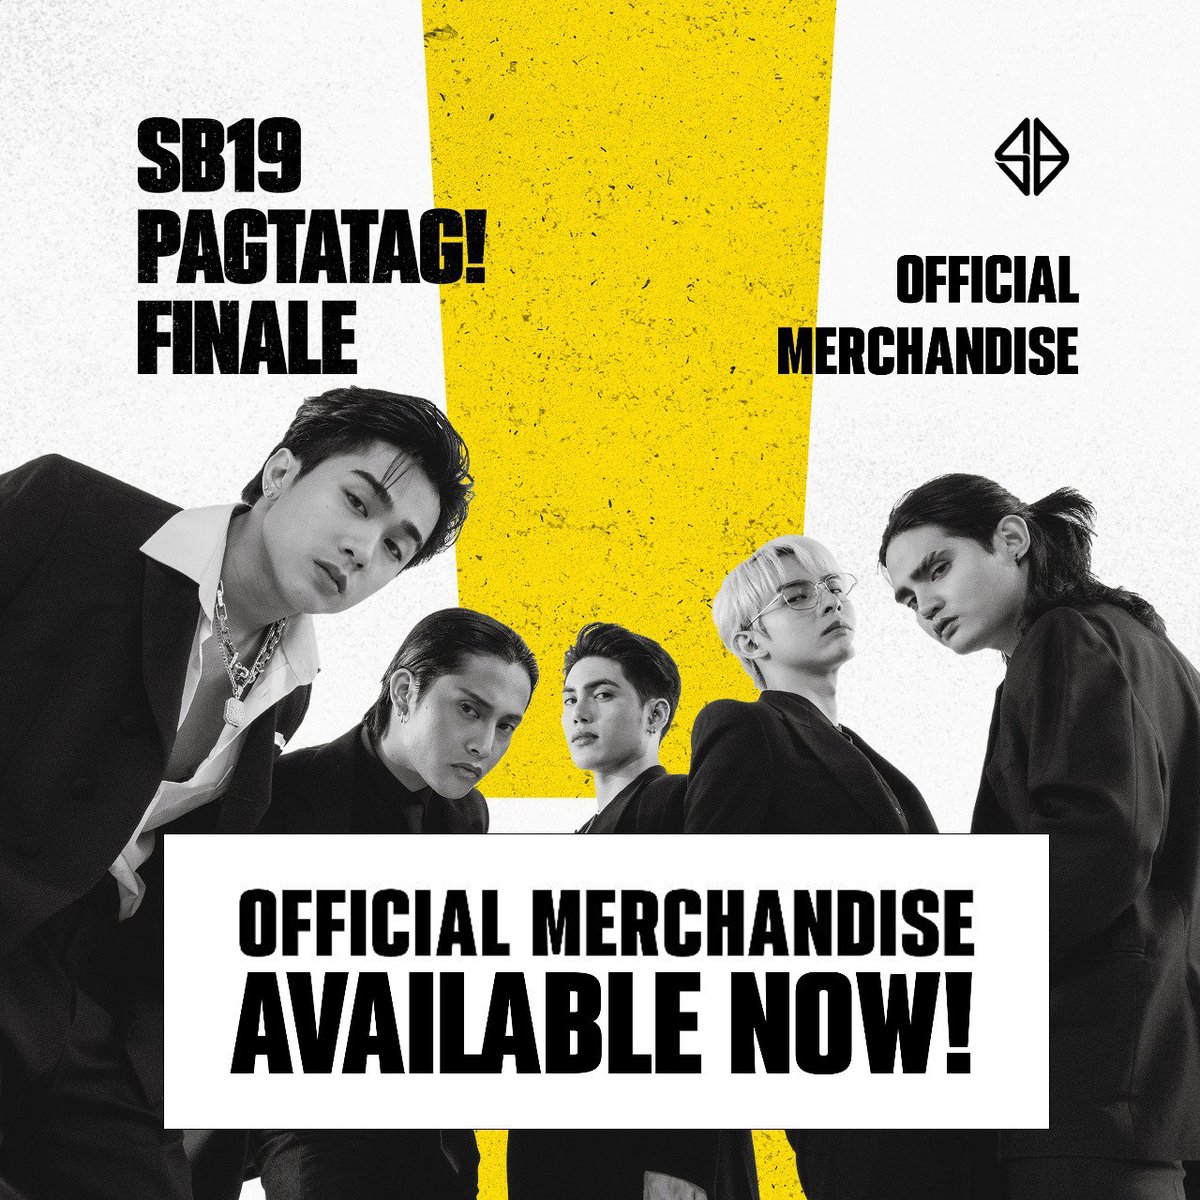 ⚠️ SB19 PAGTATAG! FINALE OFFICIAL MERCH
Limited items available for online purchases now!

Order link:
🔗 1zmerch.com

❓Get your questions answered here:
🔗1zmerch.com/pages/merch-faq

#PAGTATAG
#SB19PAGTATAG
#PAGTATAGFINALE